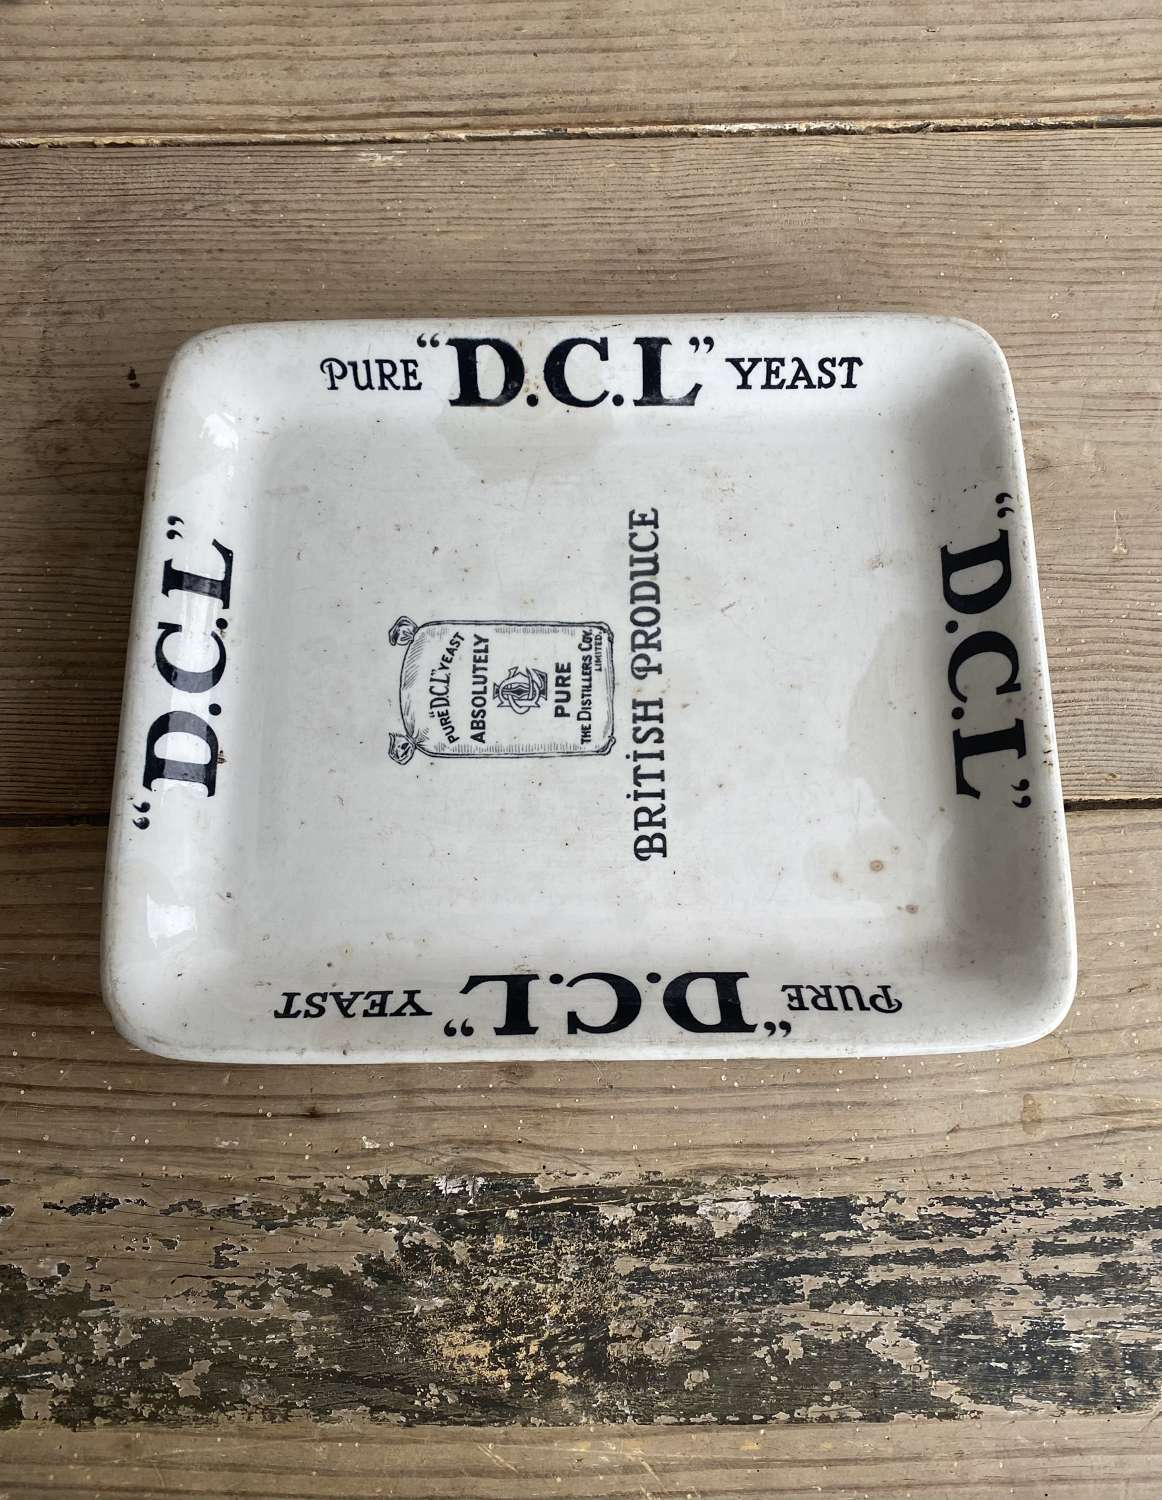 Genuine Edwardian Grocers White Ironstone Advertising Platter - DCL